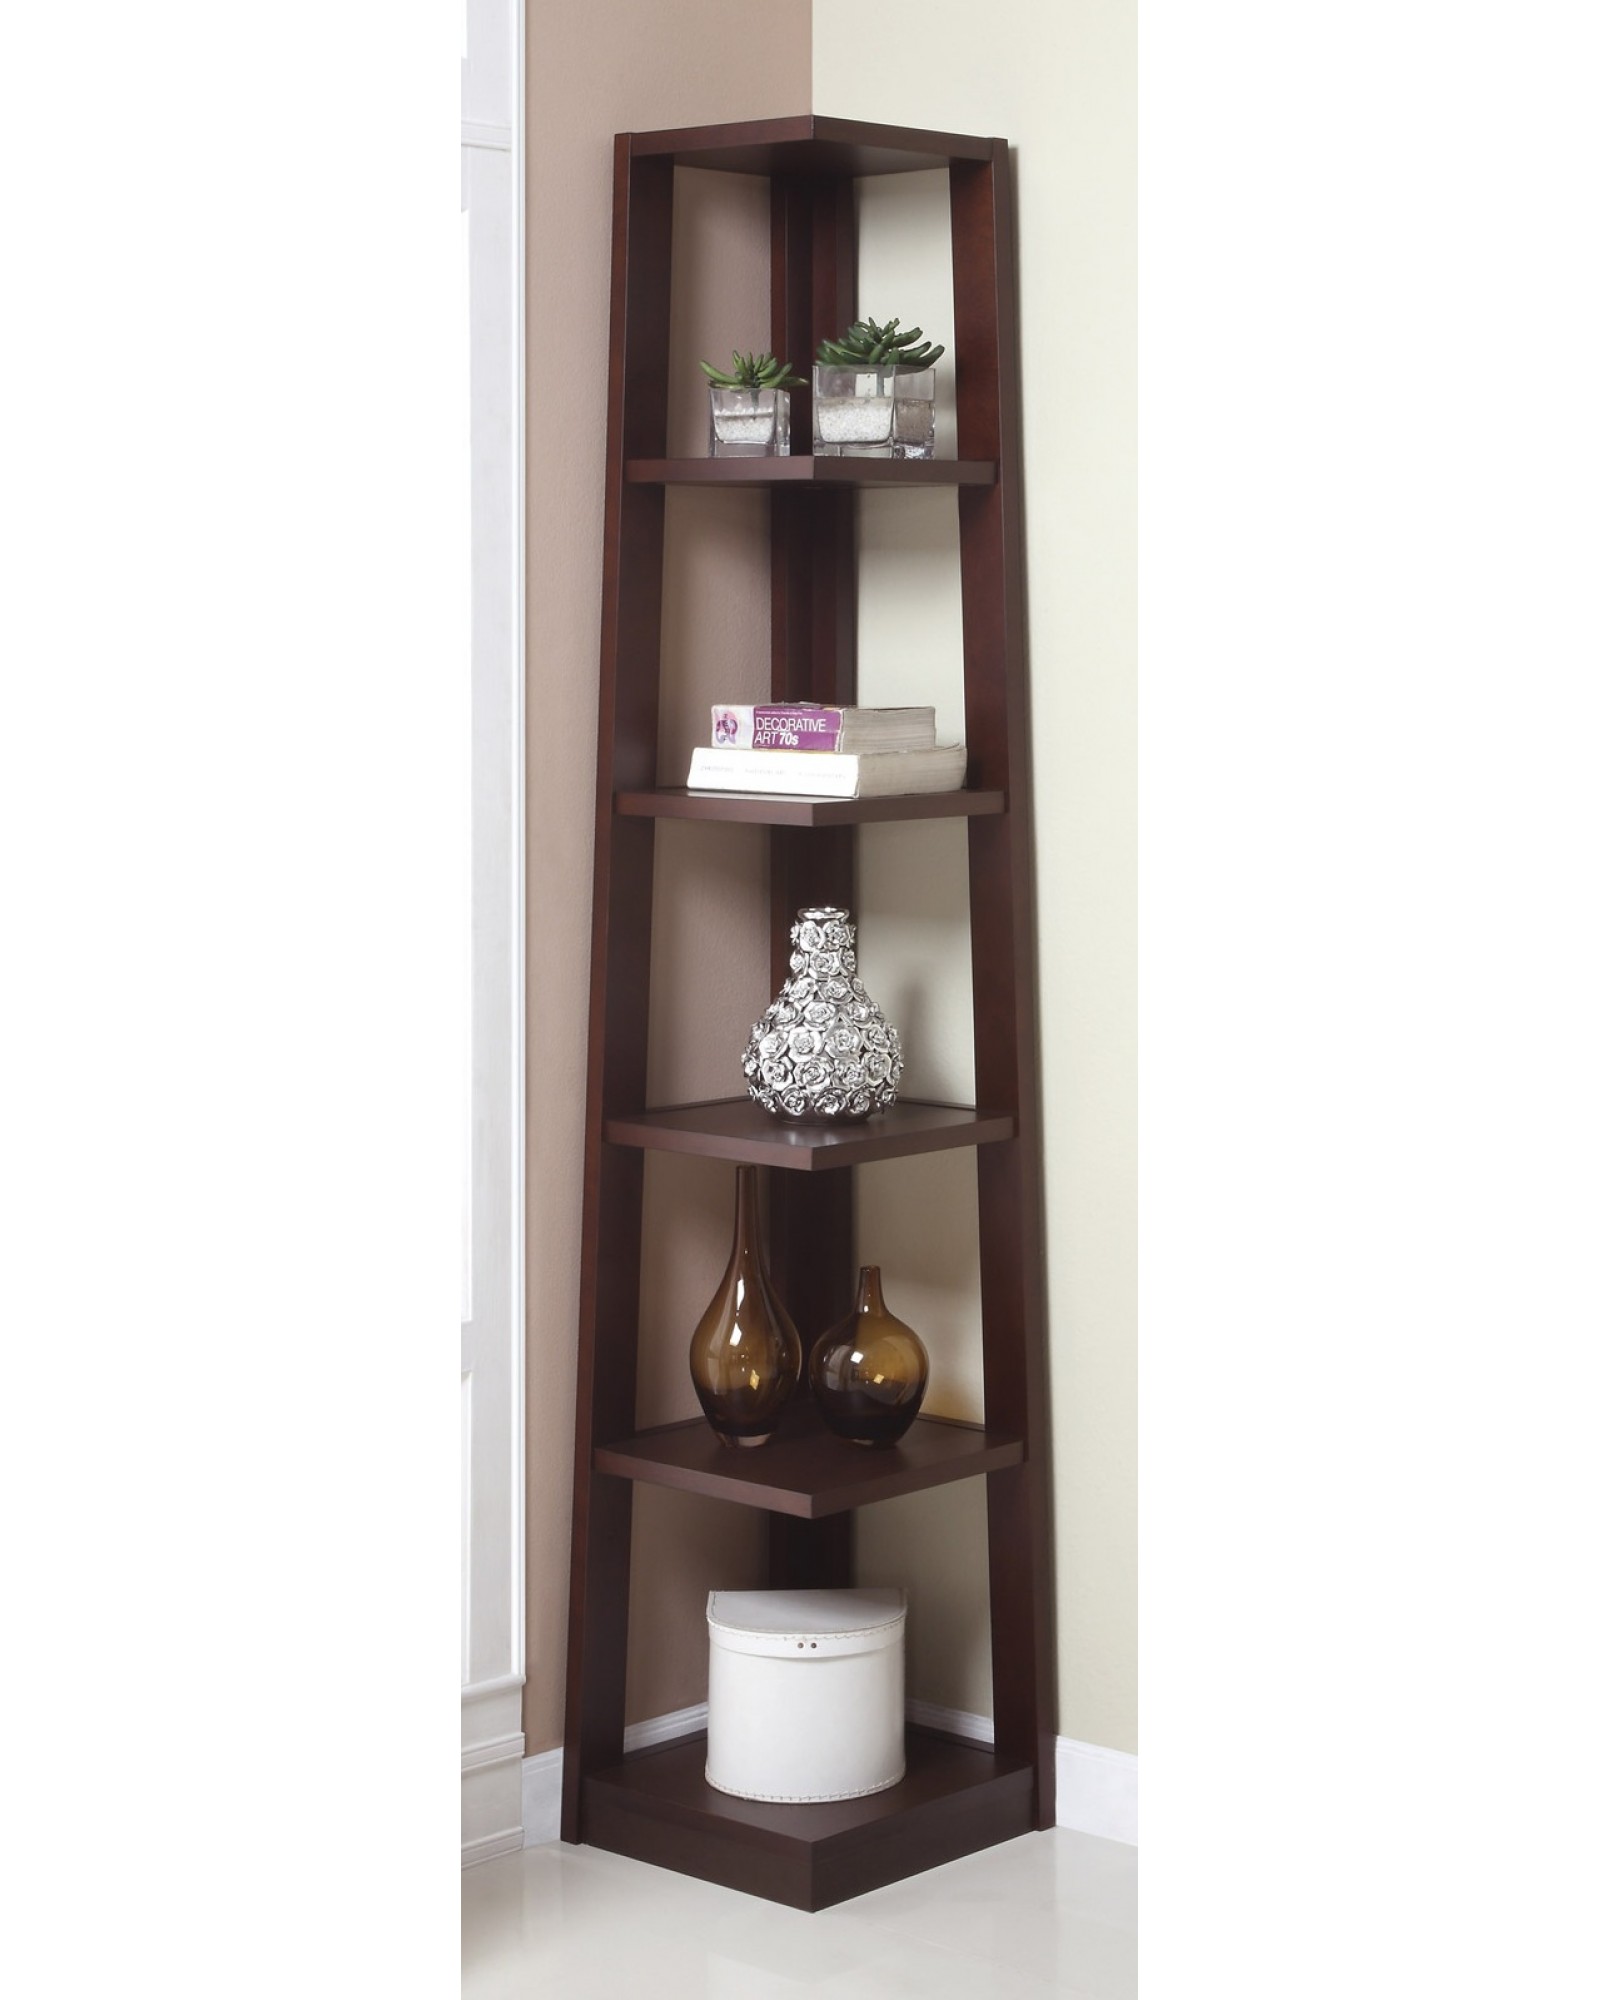 Corner Tower Shelf, Available in Walnut and Black.